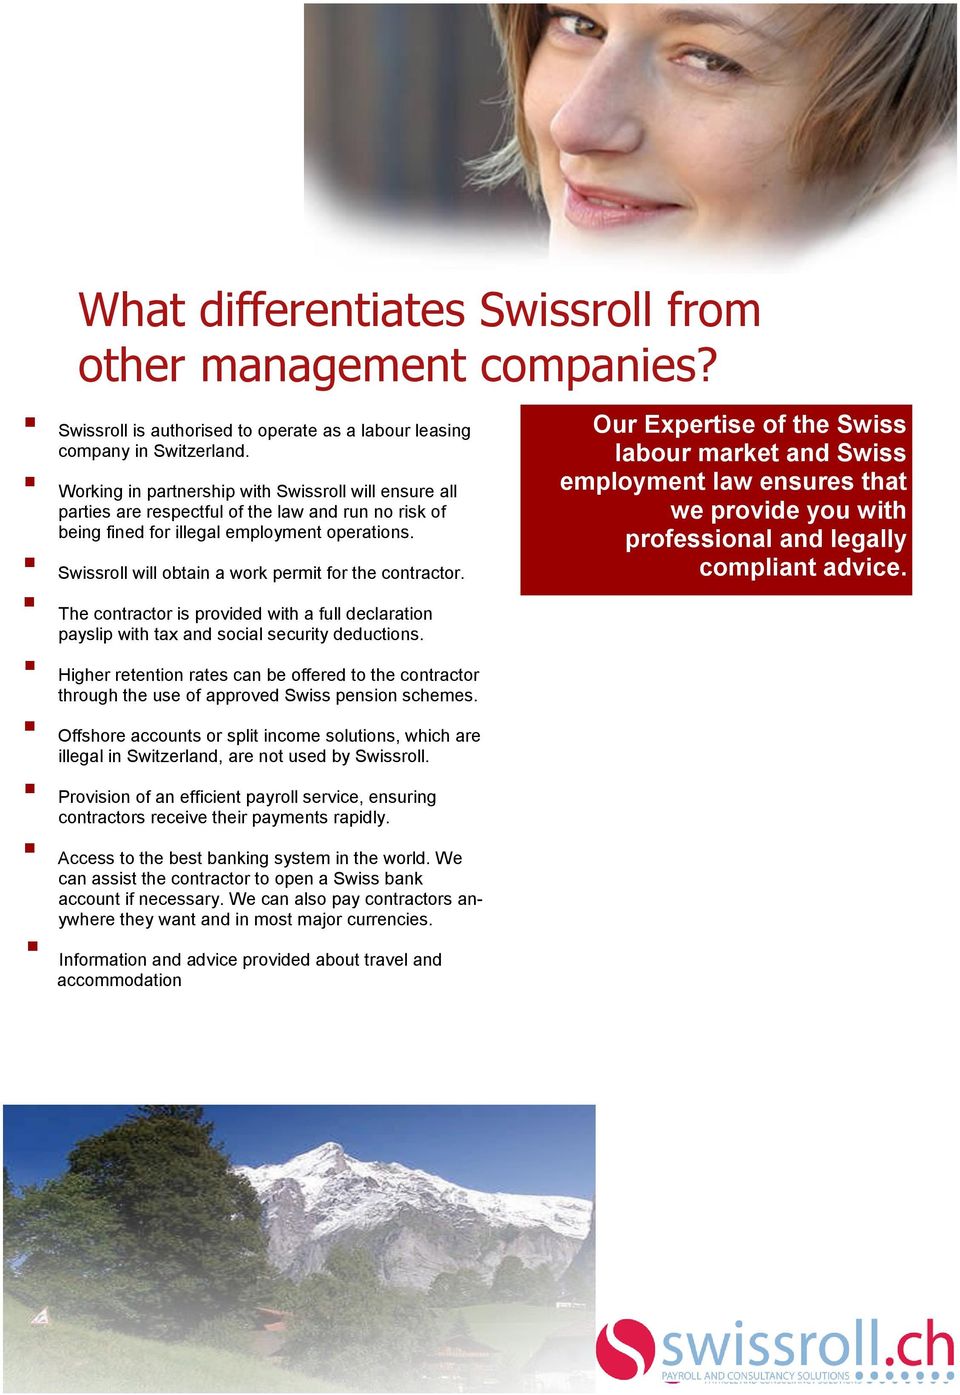 Swissroll will obtain a work permit for the contractor. The contractor is provided with a full declaration payslip with tax and social security deductions.